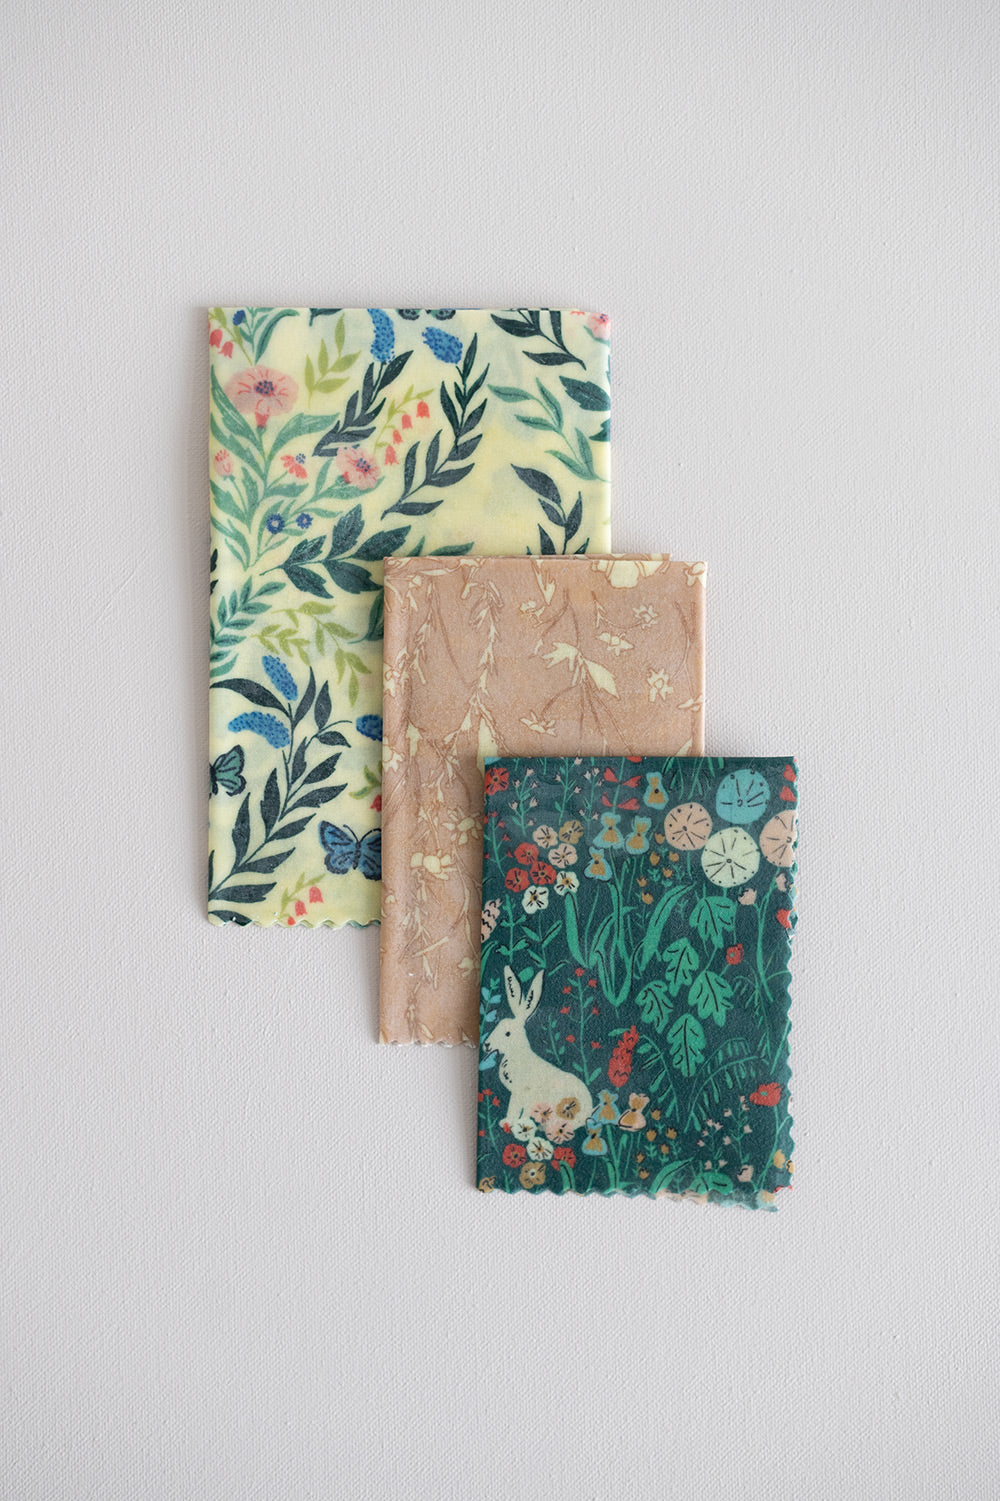 A variety pack of 3 different garden inspired patterned beeswax wrap overlaying from largest to smallest.